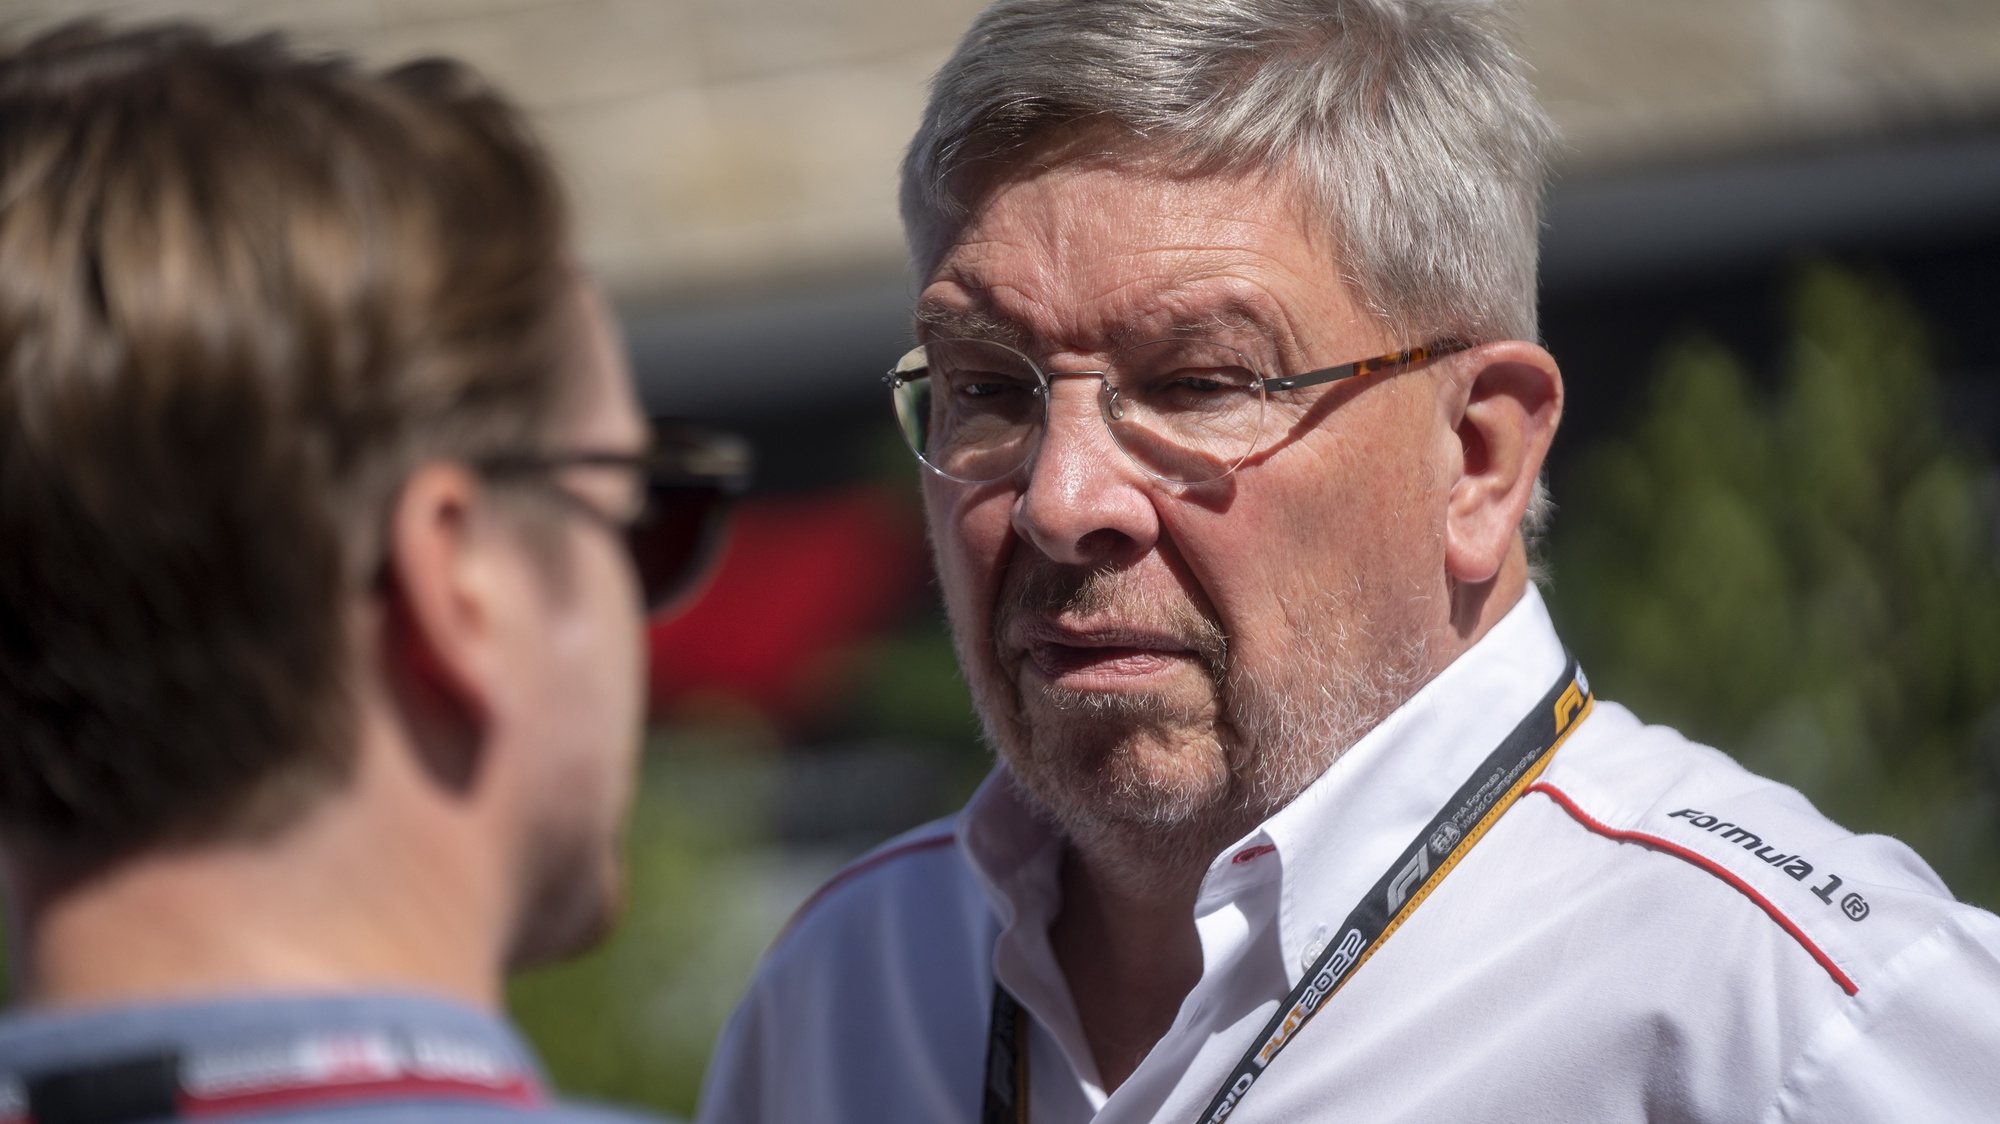 epa10257708 British Formula One managing director, motor sports and technical director Ross Brawn in the paddock prior to FP1 (free practice) at the Circuit of The Americas in Austin, Texas, USA, 21 October 2022. The Formula One Grand Prix of the USA takes place on 23 October 2022.  EPA/SHAWN THEW